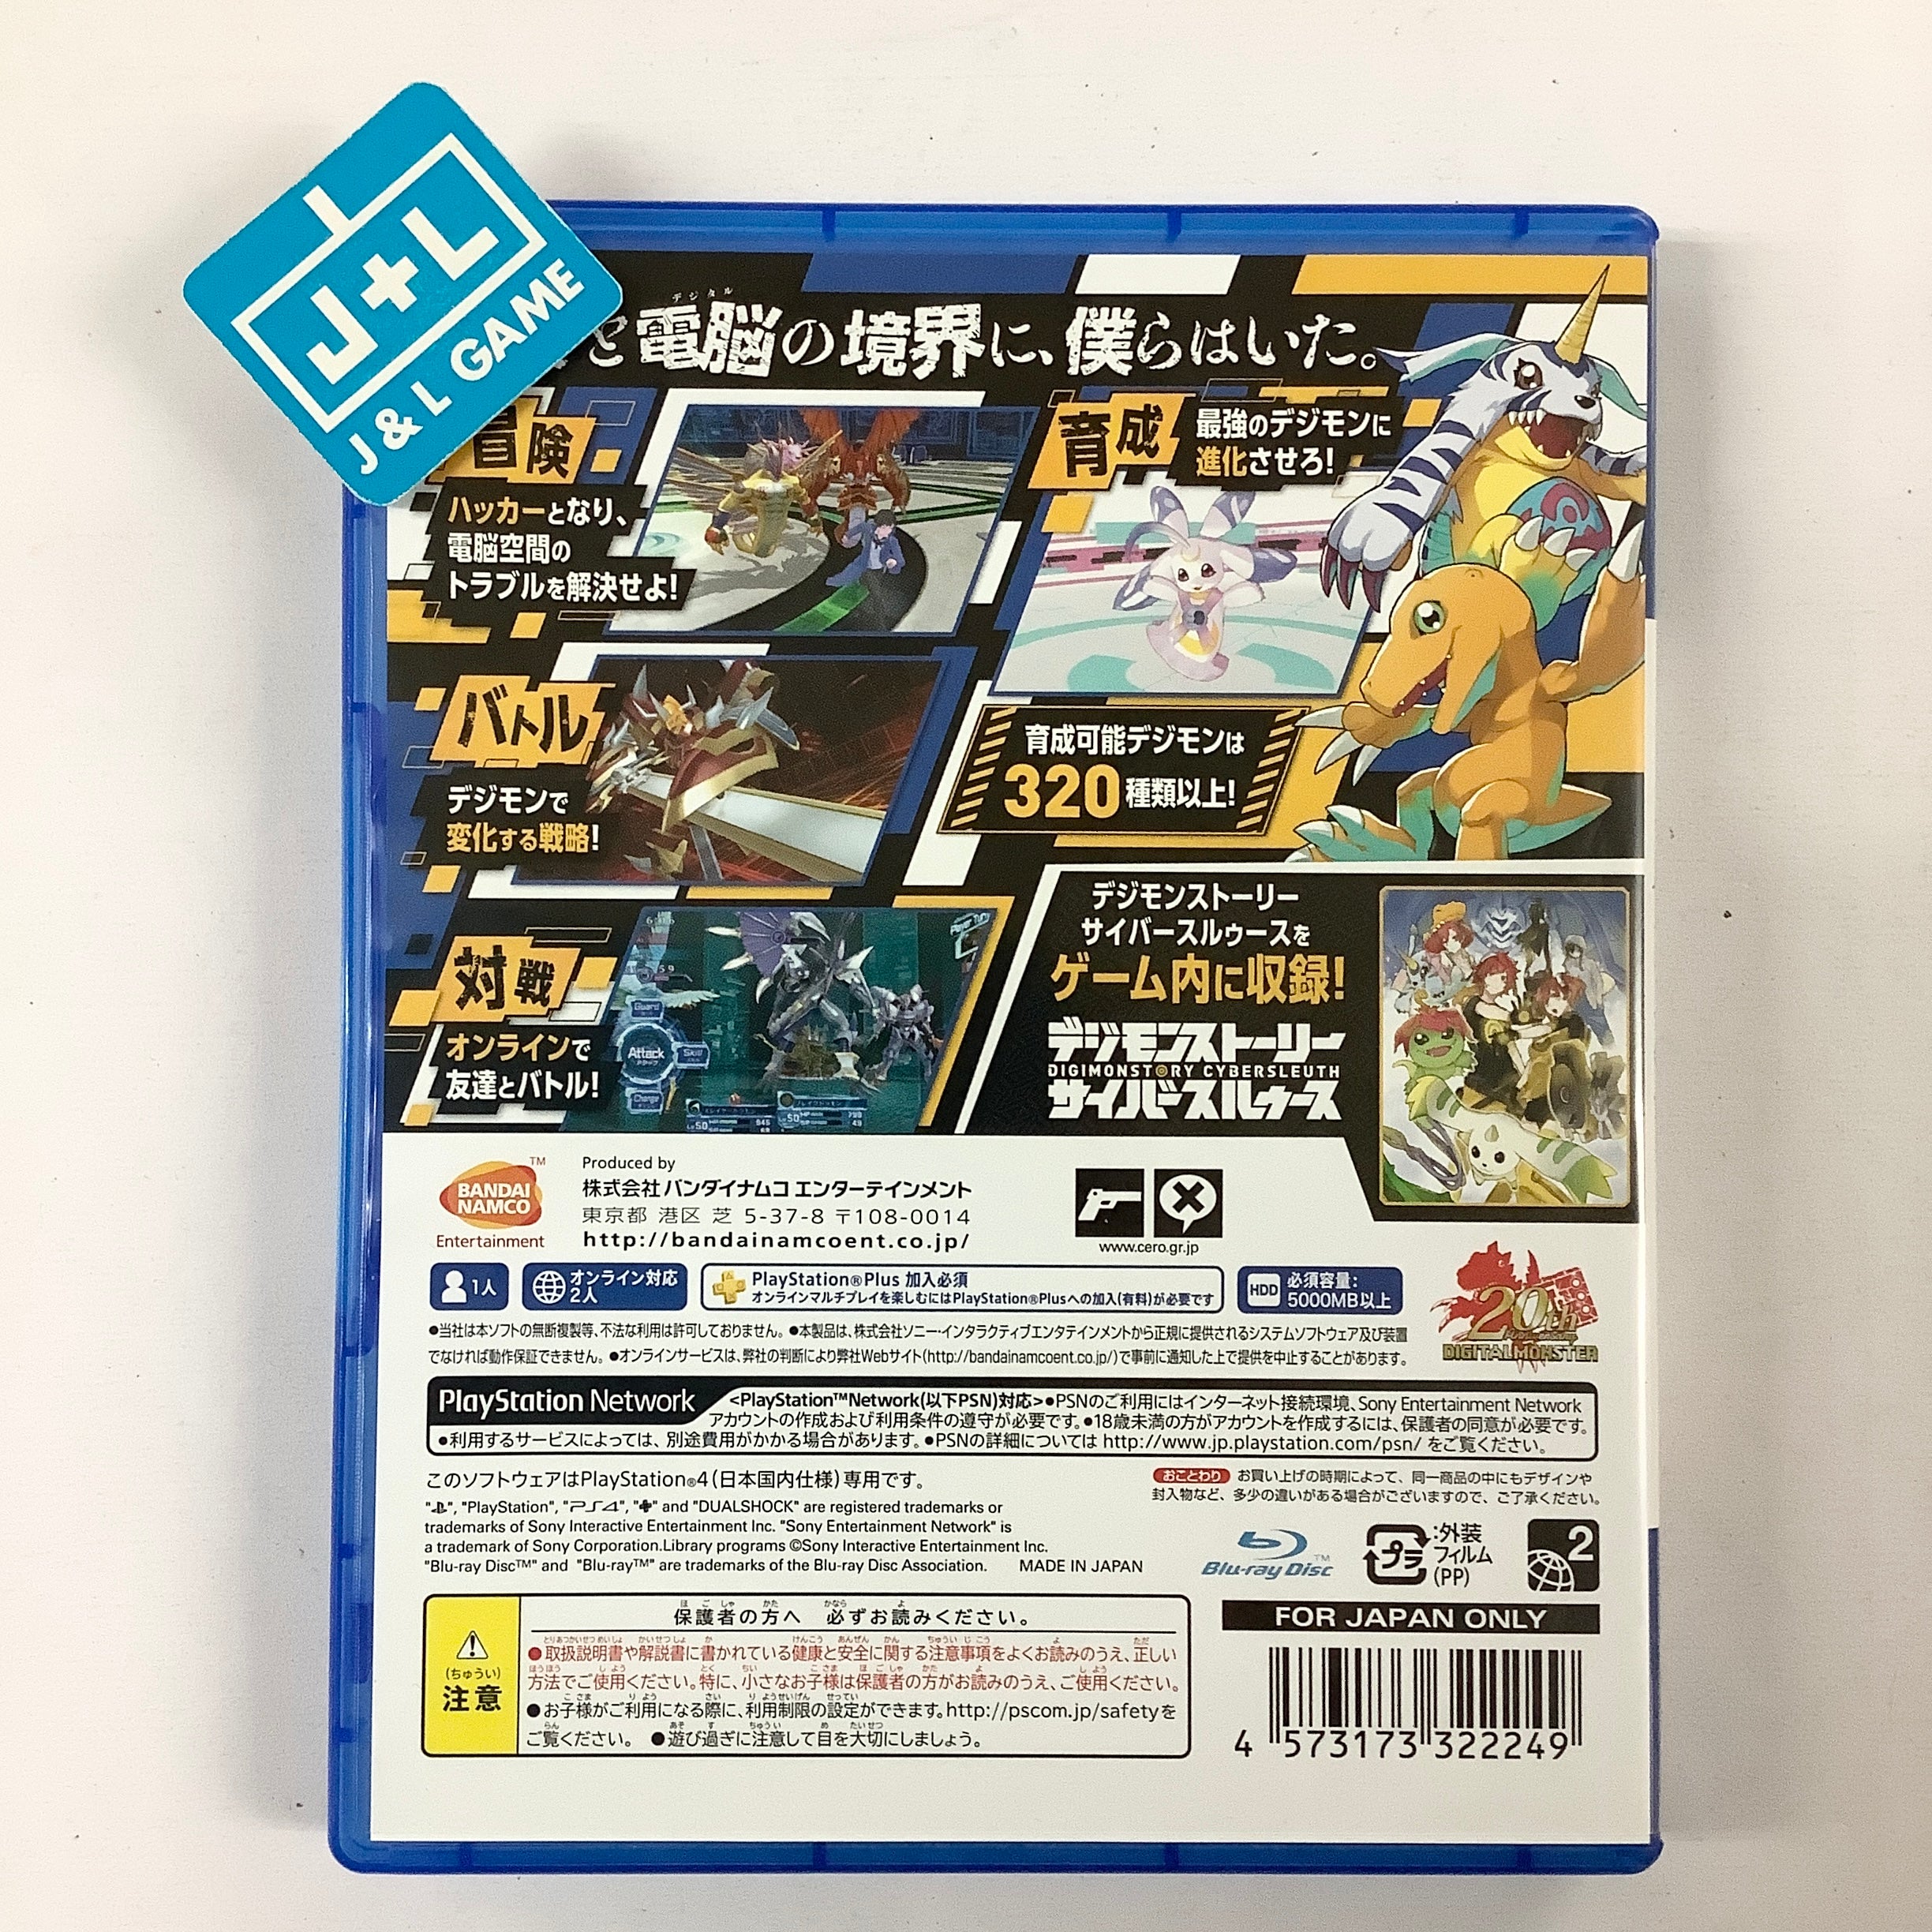 Digimon Story Cyber Sleuth: Hacker's Memory - (PS4) PlayStation 4 [Pre-Owned] (Japanese Import) Video Games Bandai Namco Games   